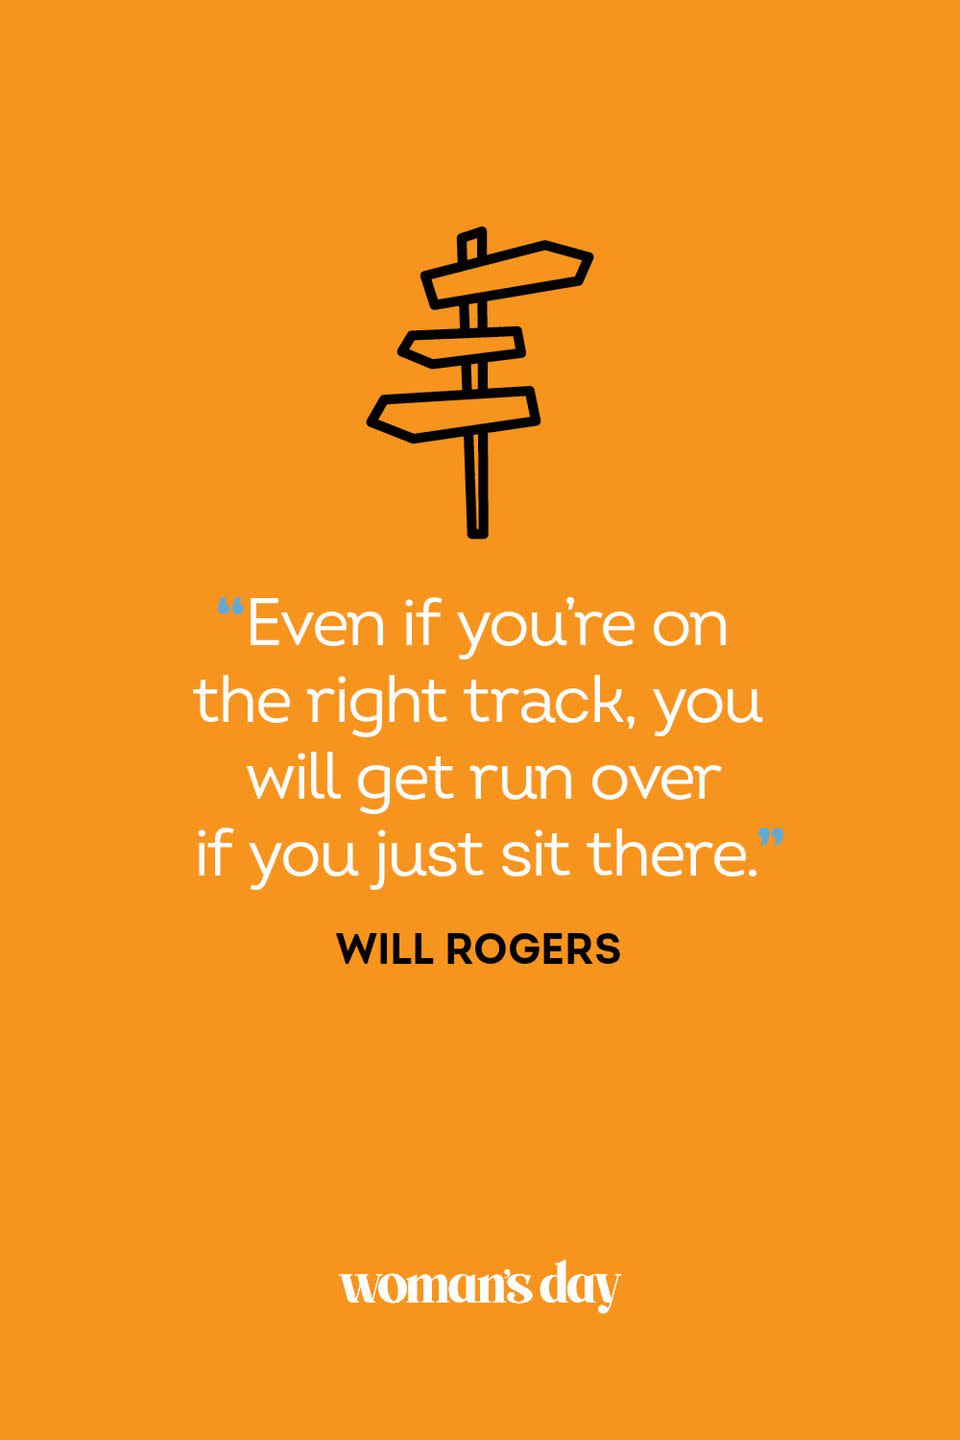 <p>“Even if you’re on the right track, you will get run over if you just sit there.”</p>